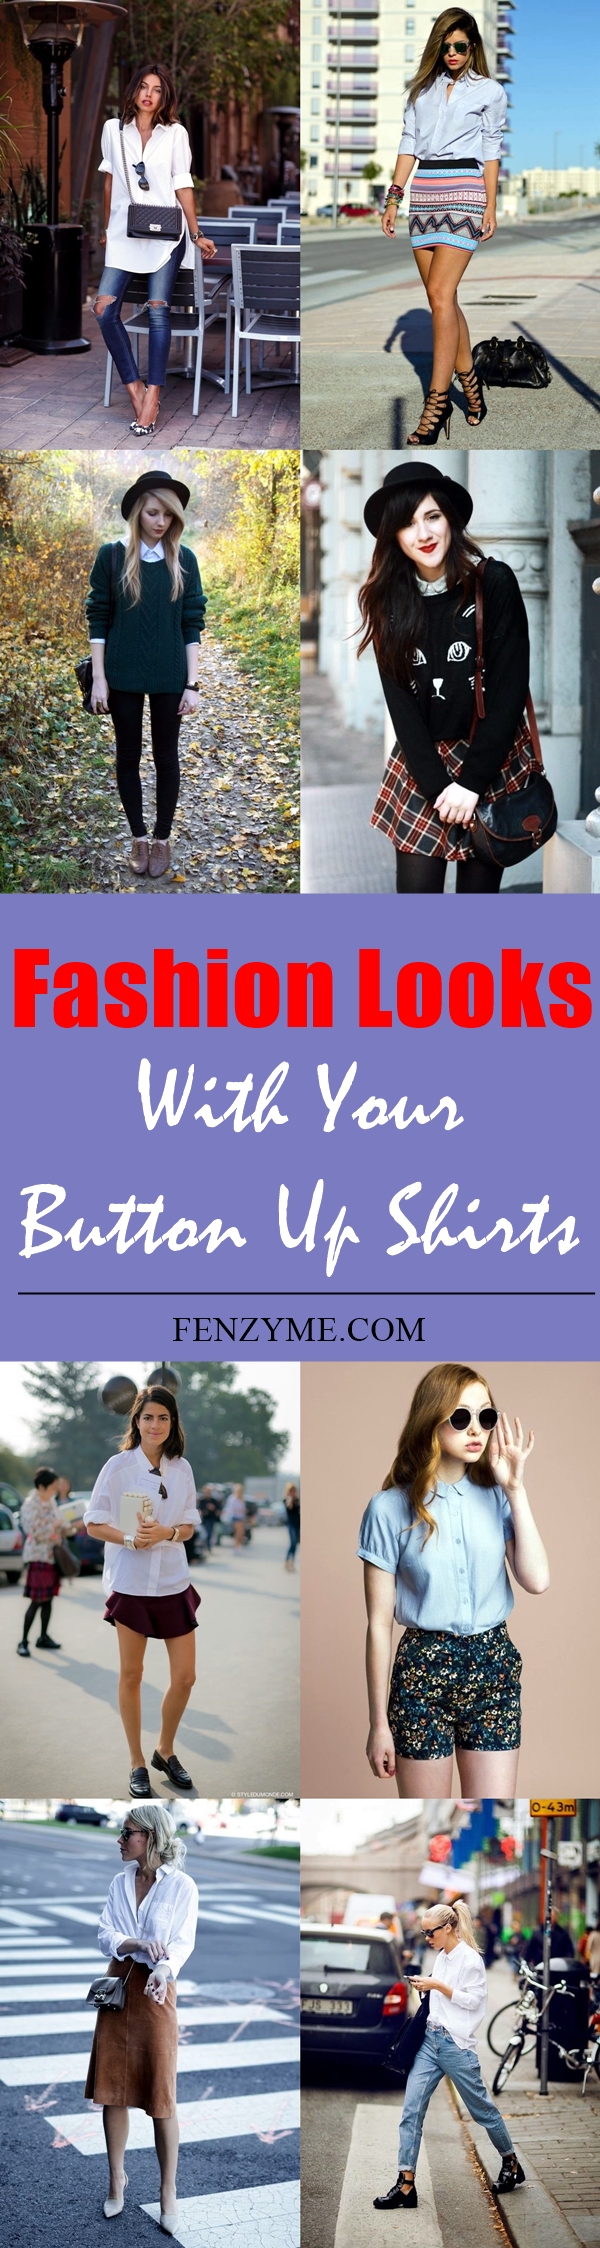 fashion-looks-with-your-button-up-shirts-1-tile